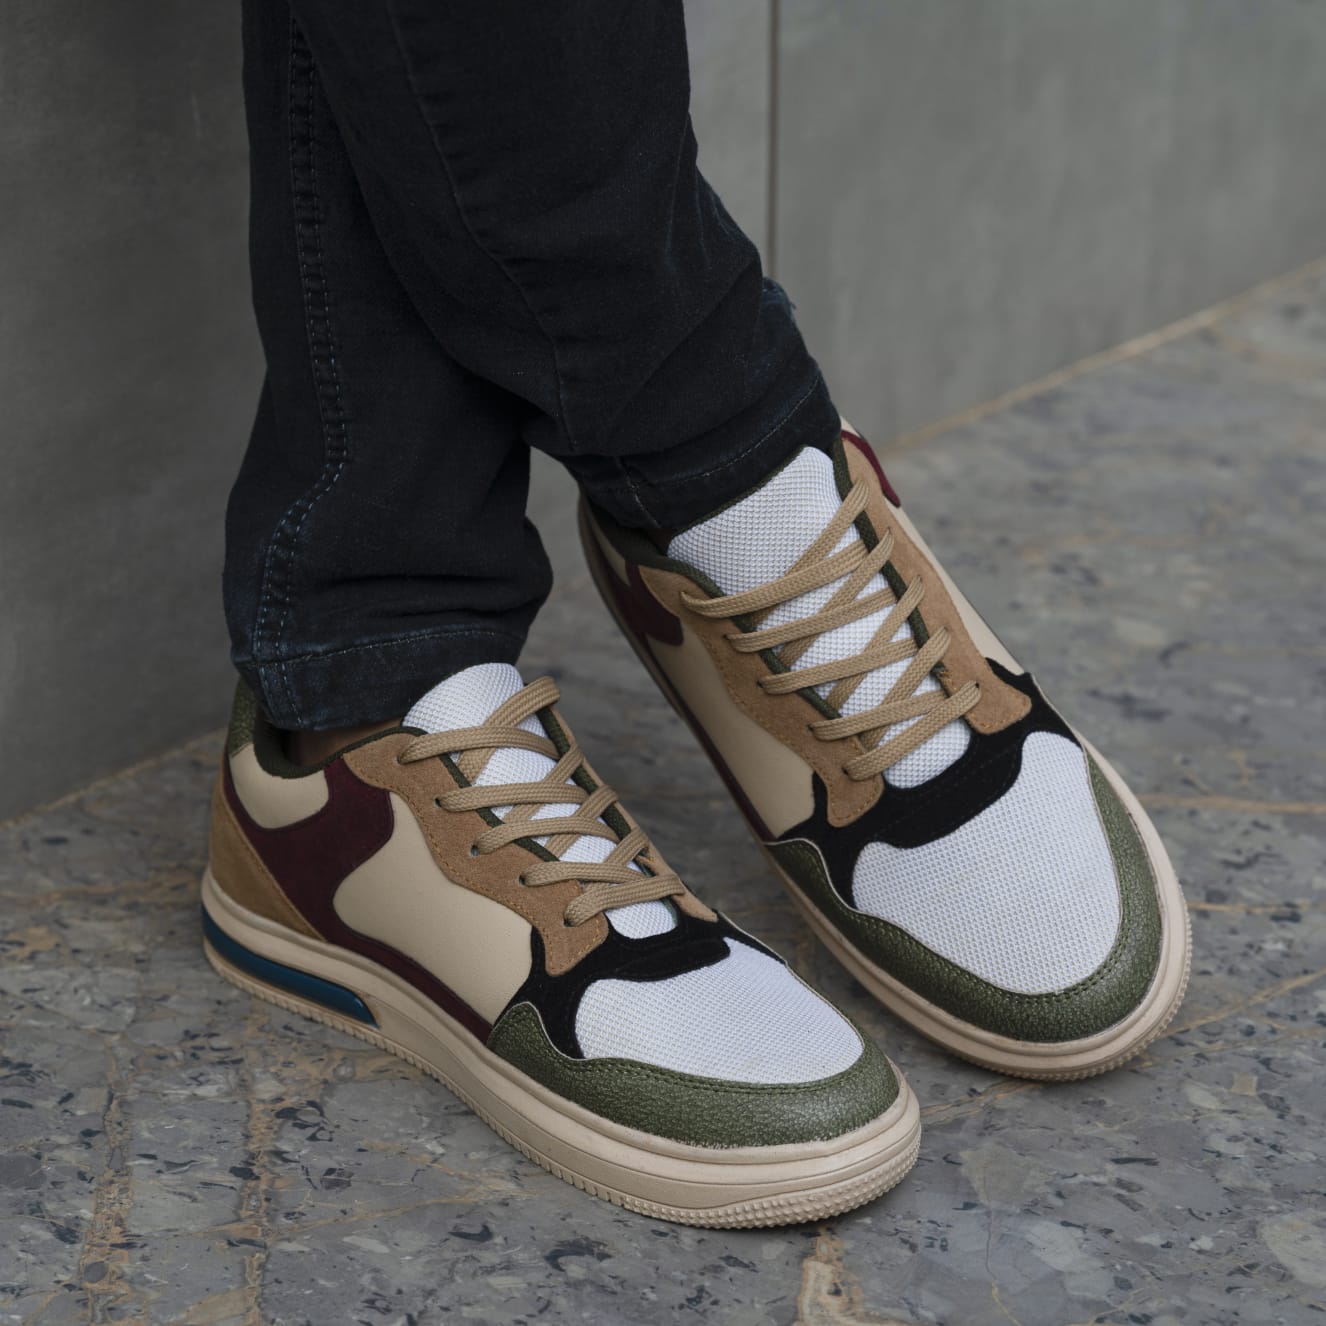 The Aurous Flare Laceup Sneakers